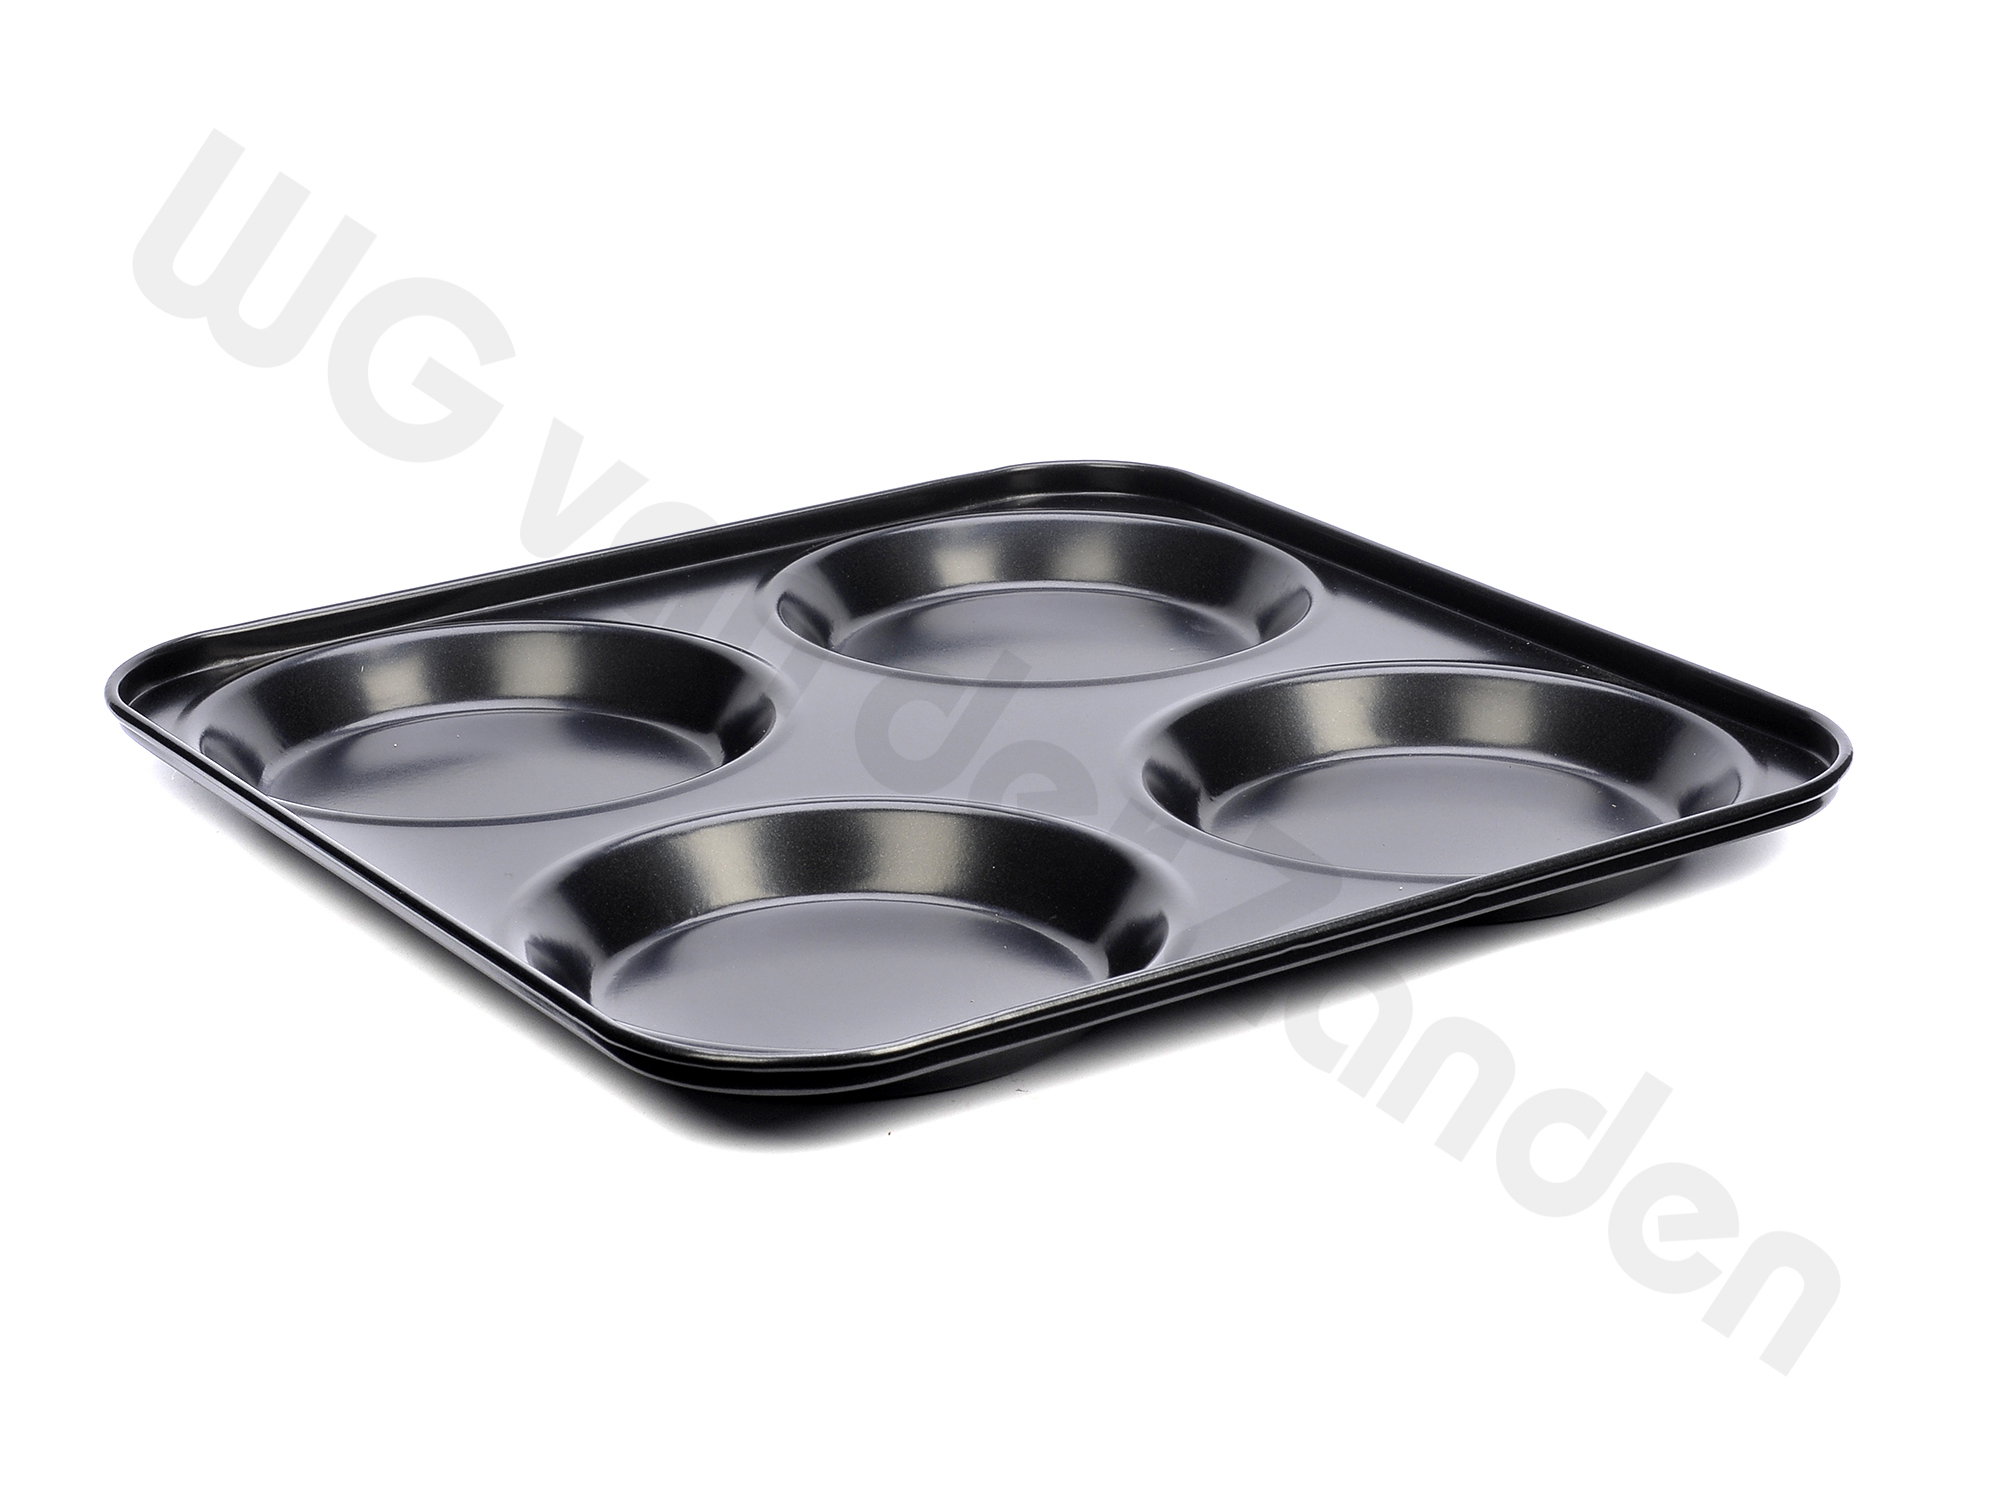 270243 YORKSHIRE PUDDING TRAY 4 CUPS